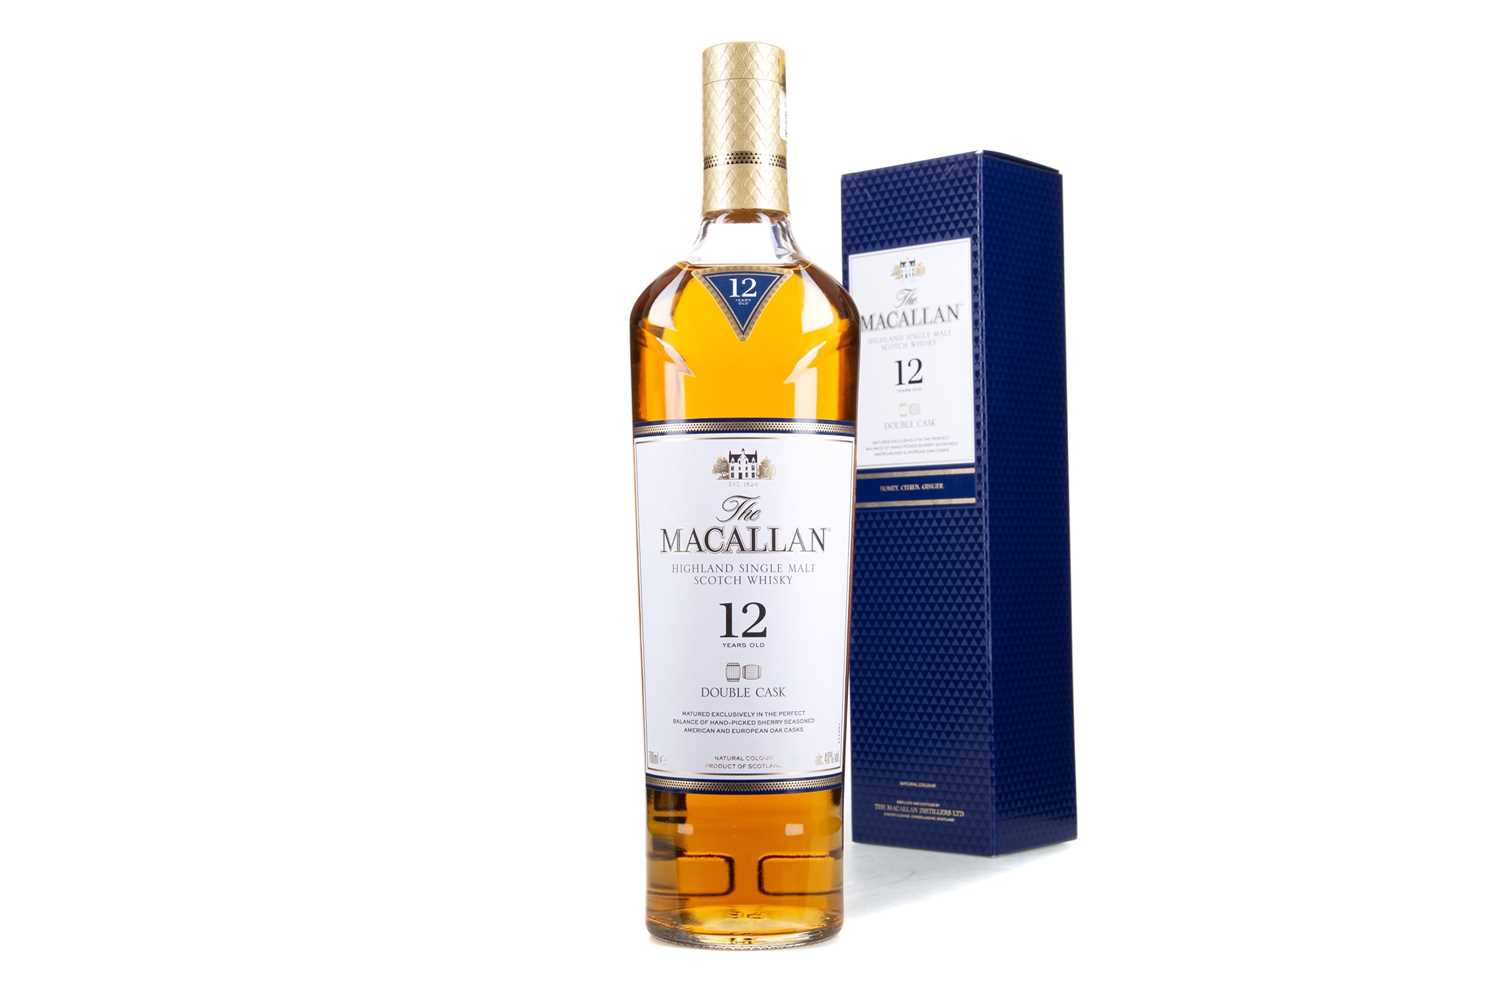 Lot 163 - MACALLAN 12 YEAR OLD DOUBLE CASK